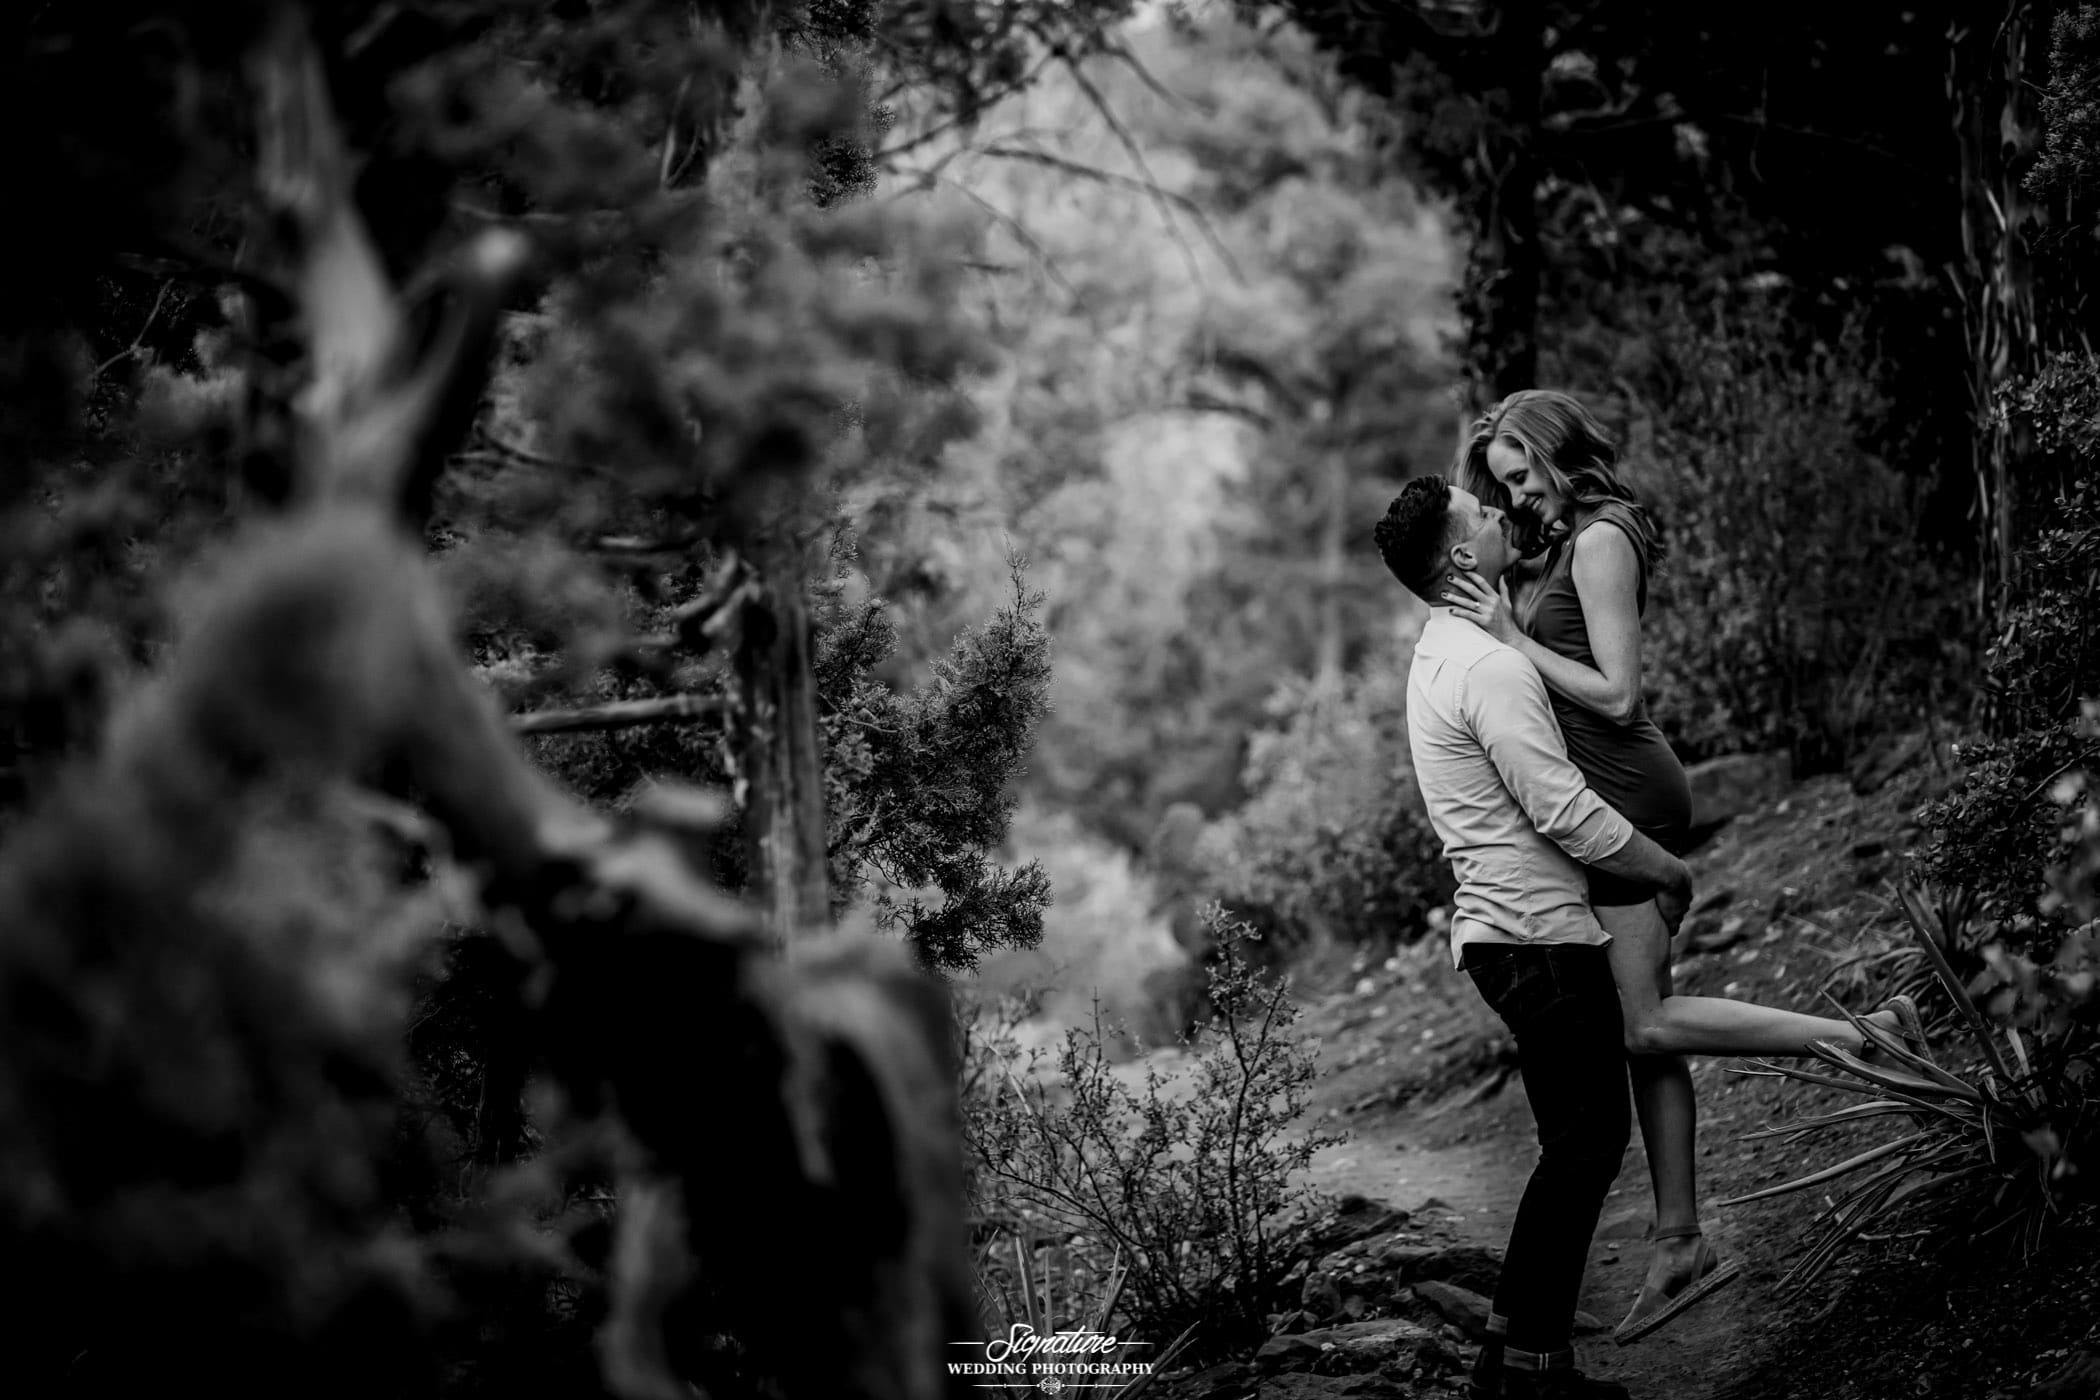 Man picking up woman smiling at each other in forest black and white